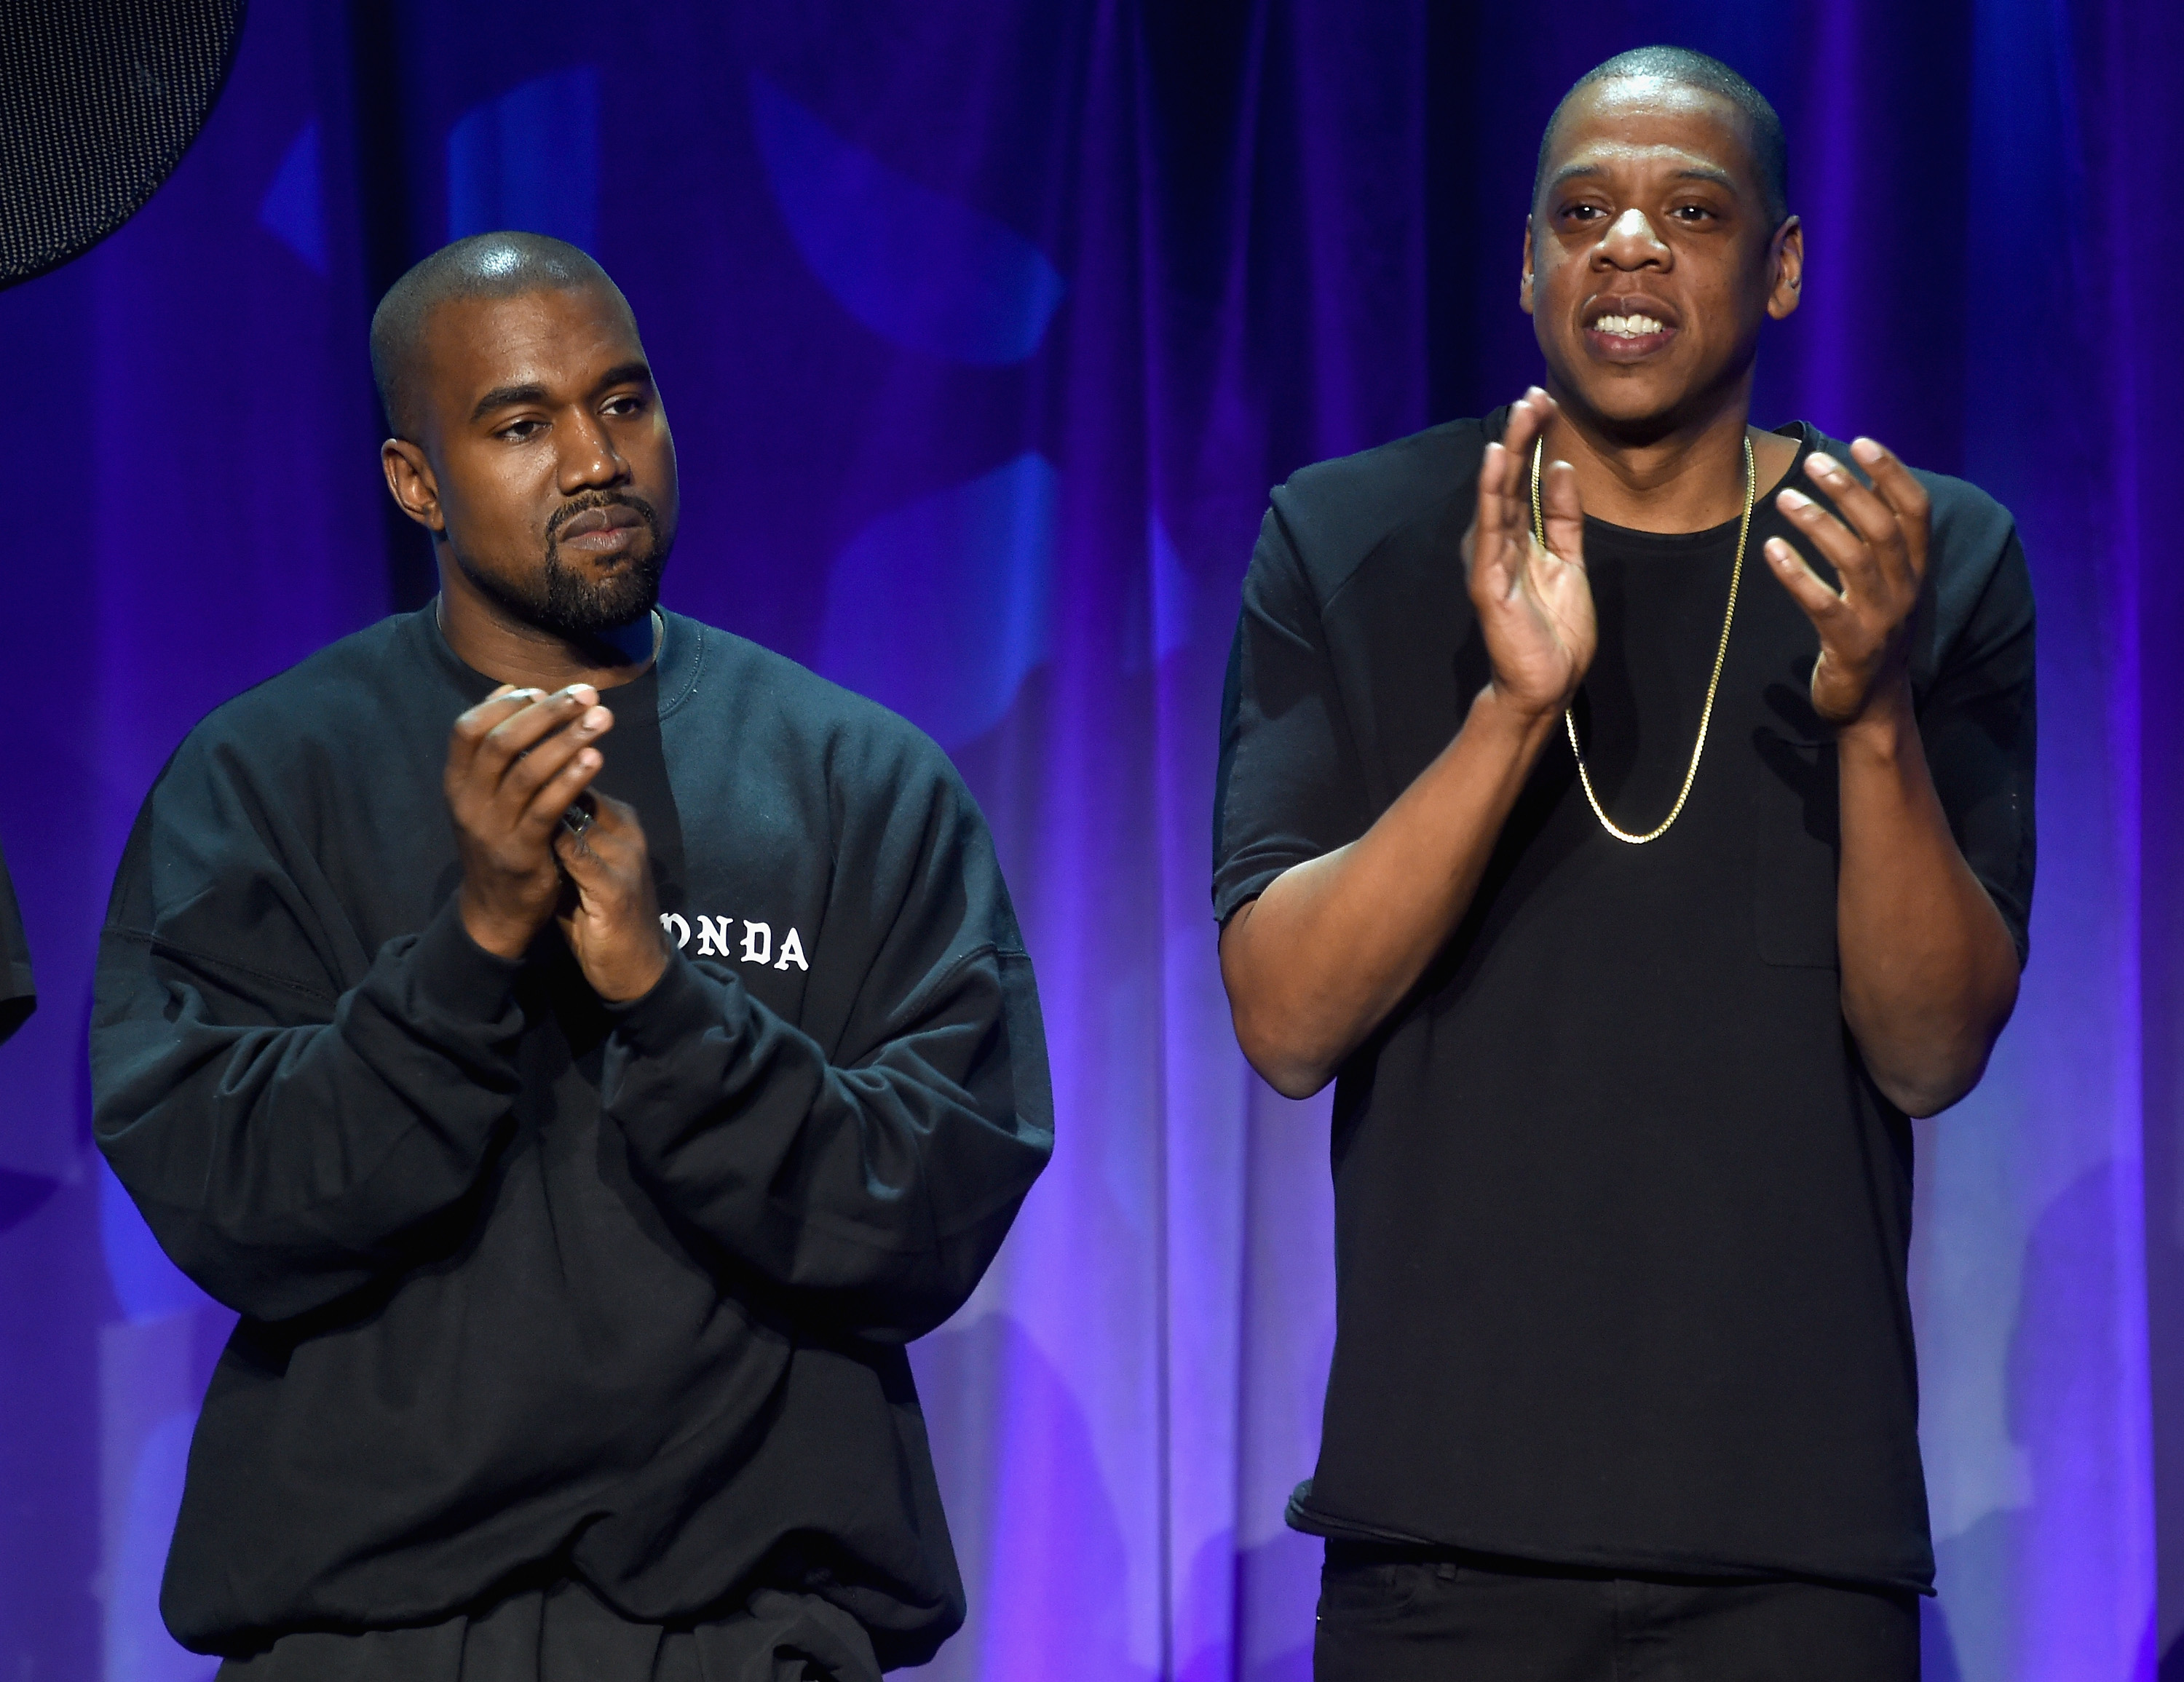 Kanye West (L) and JAY-Z onstage at the Tidal launch event #TIDALforALL at Skylight at Moynihan Station on March 30, 2015 in New York City. (Jamie McCarthy&mdash;2015 Getty Images)